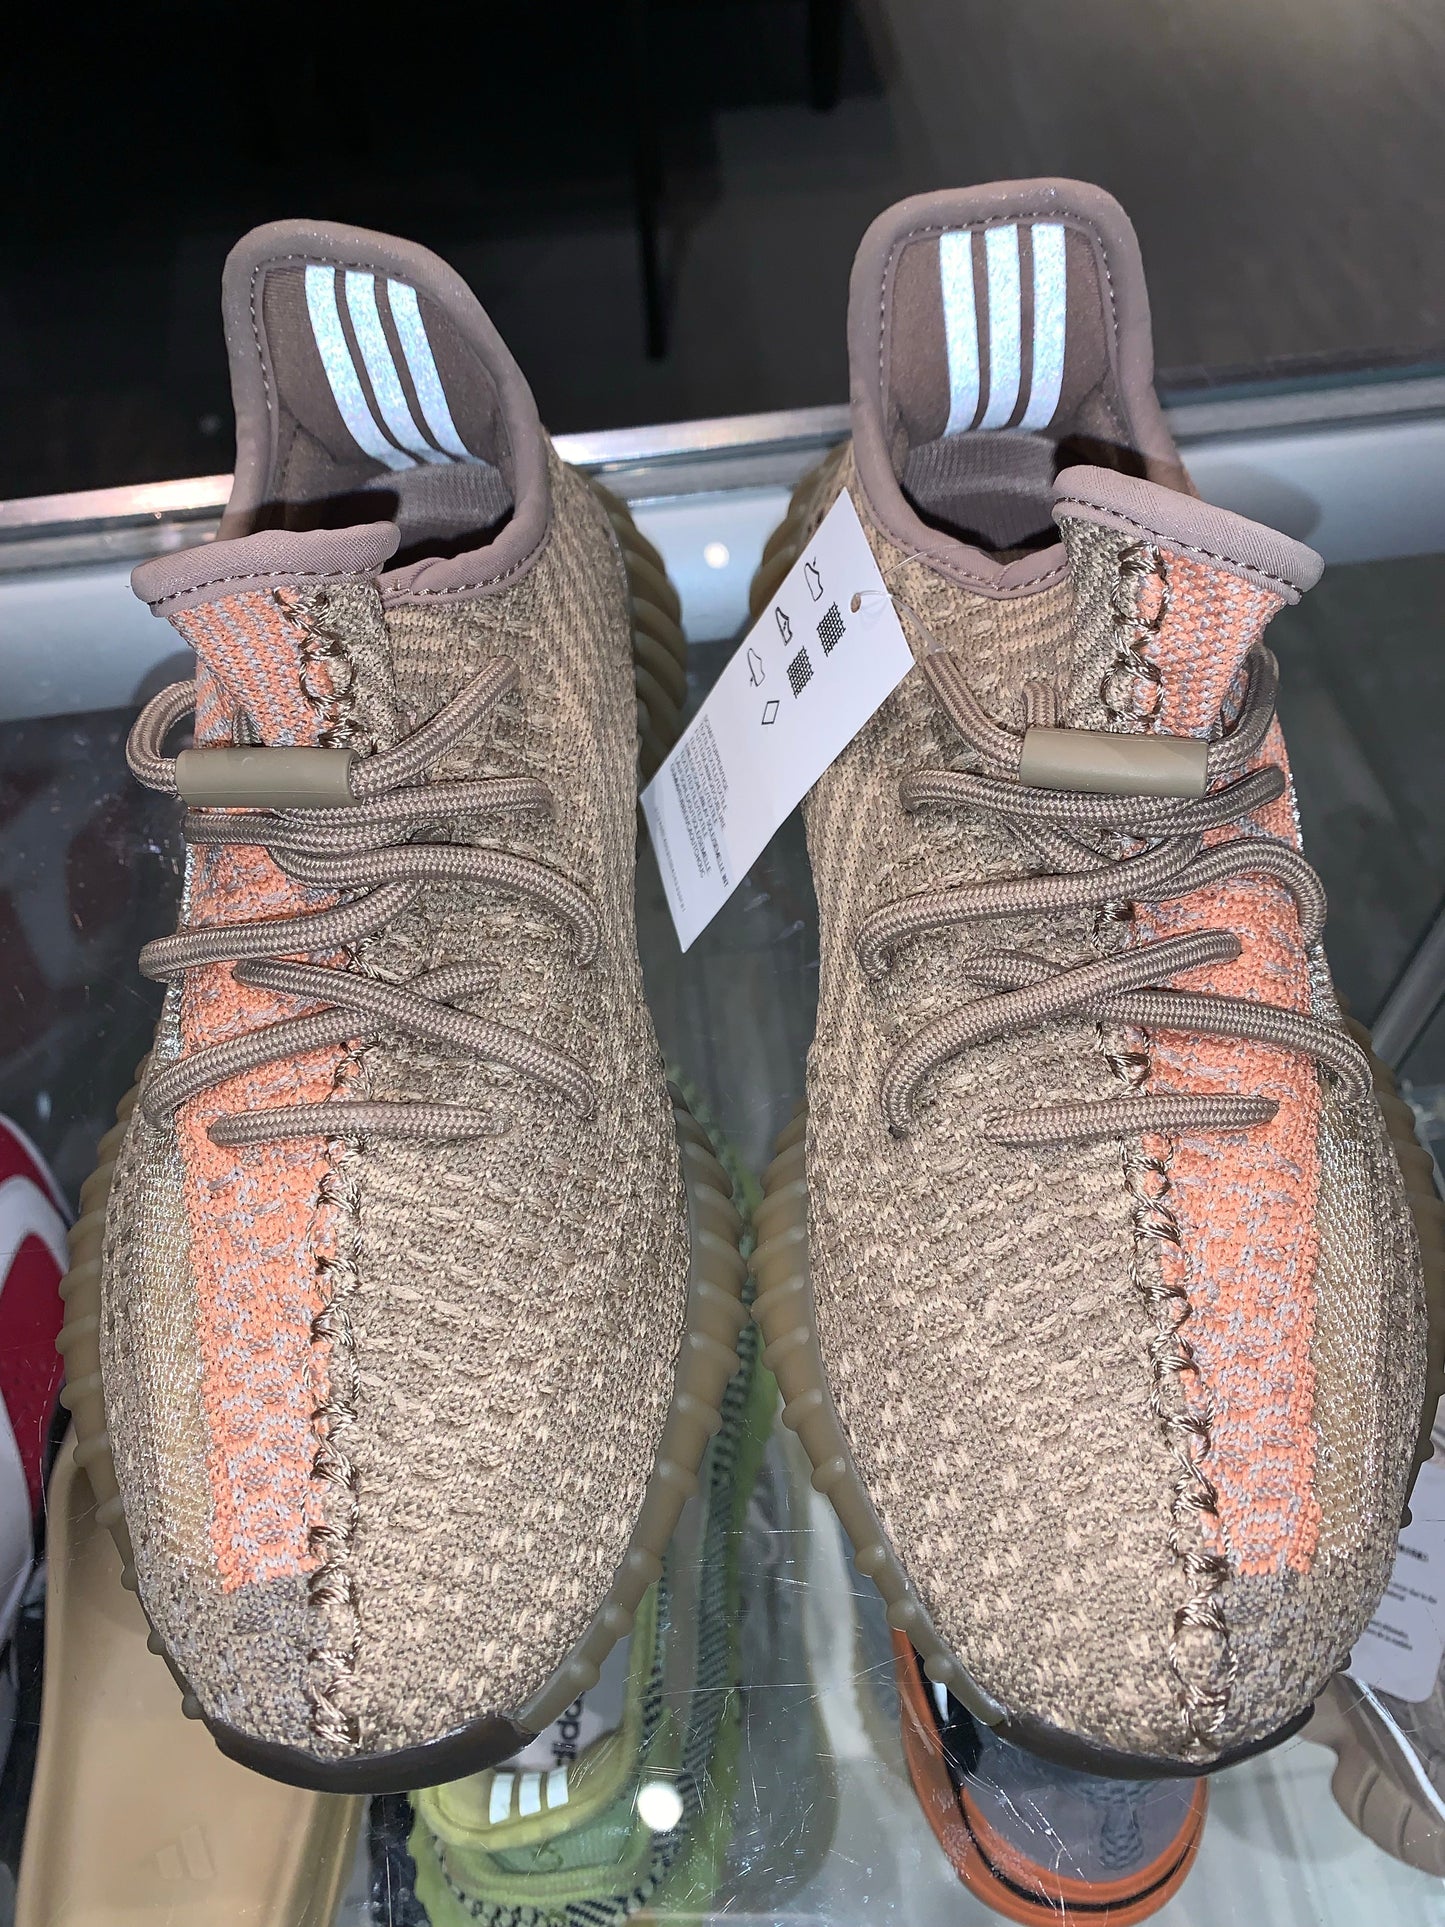 Size 11 Adidas Yeezy Boost 350 V2 “Sand Taupe” Brand New (Mall)